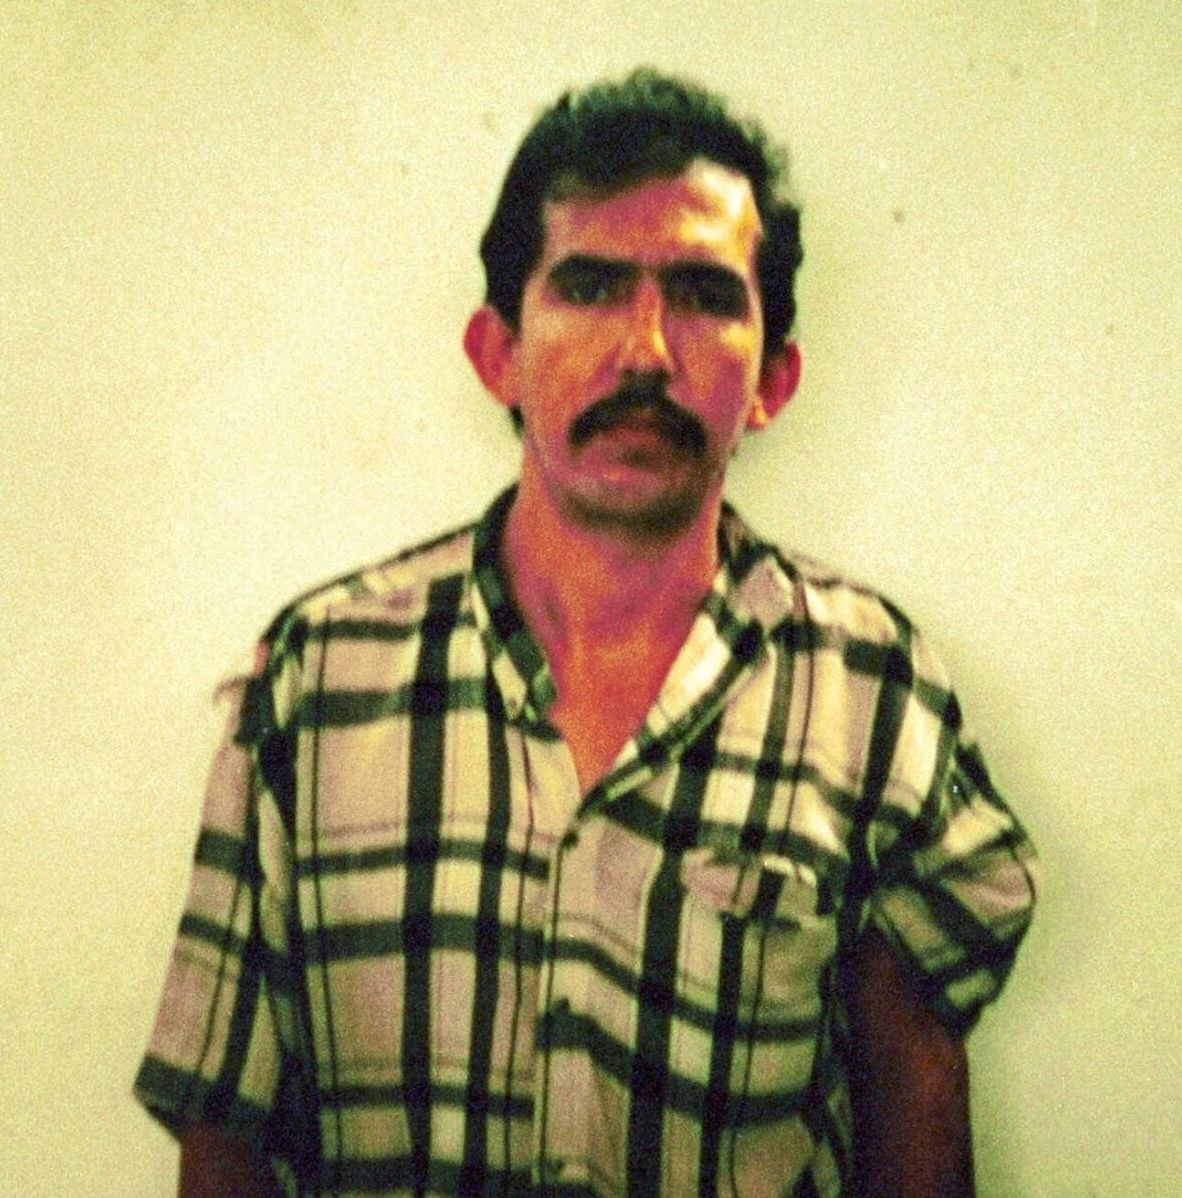 I’m going with Luis Garavito. He’s a serial killer who was convicted of brutally murdering and raping 147 young boys, however the death toll is likely over 200. He is currently 65 years old and in prison. However, because he aided police in finding the bodies, his sentence was reduced. He could possibly be out of prison next year. -ClaraBow01